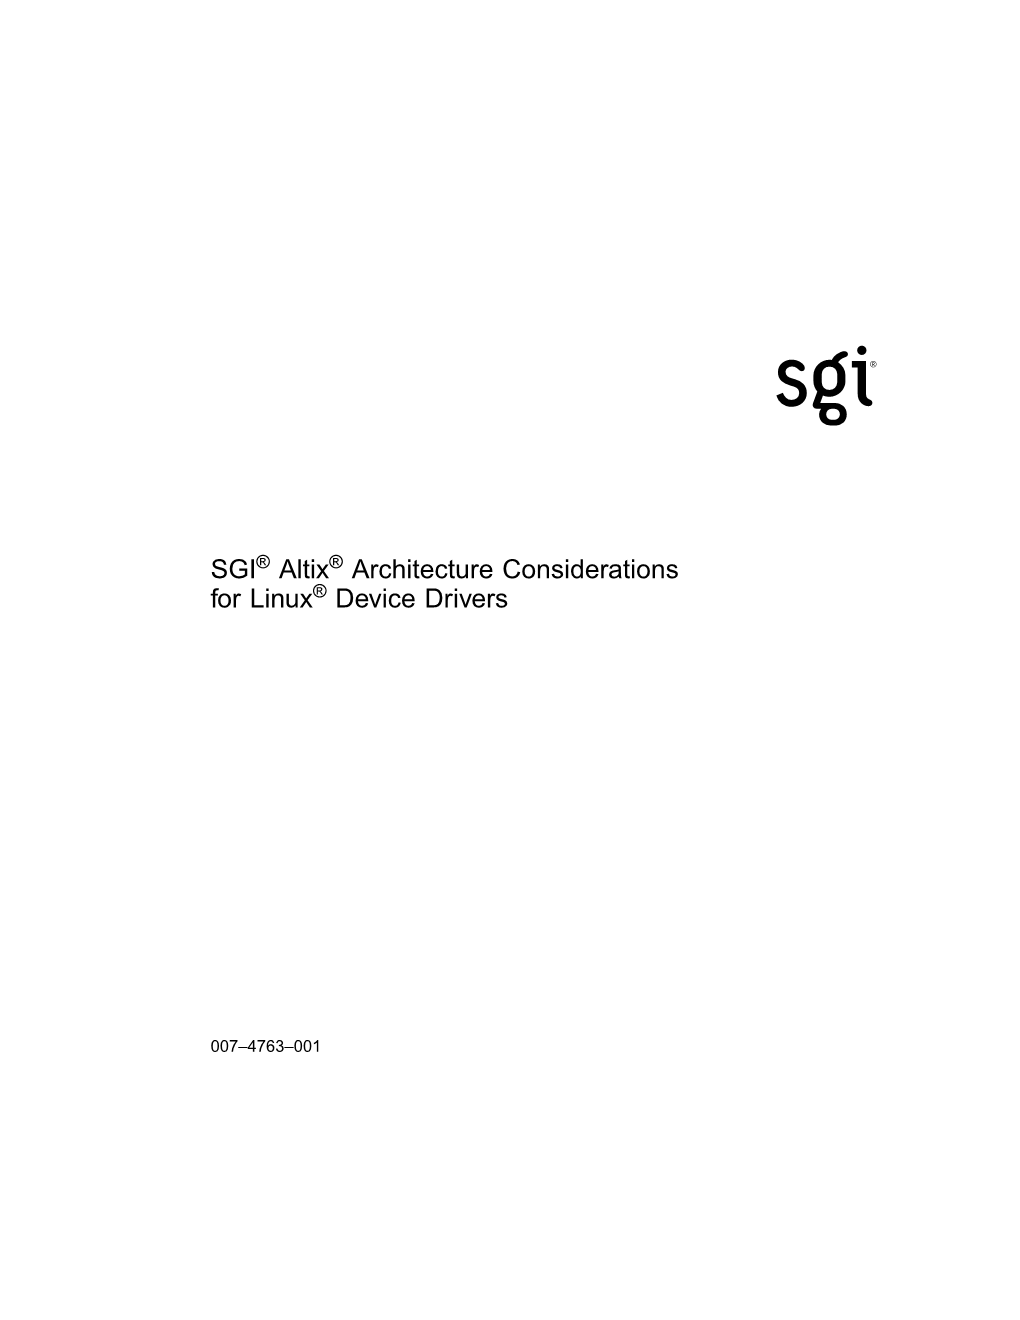 SGI® Altix® Architecture Considerations for Linux® Device Drivers